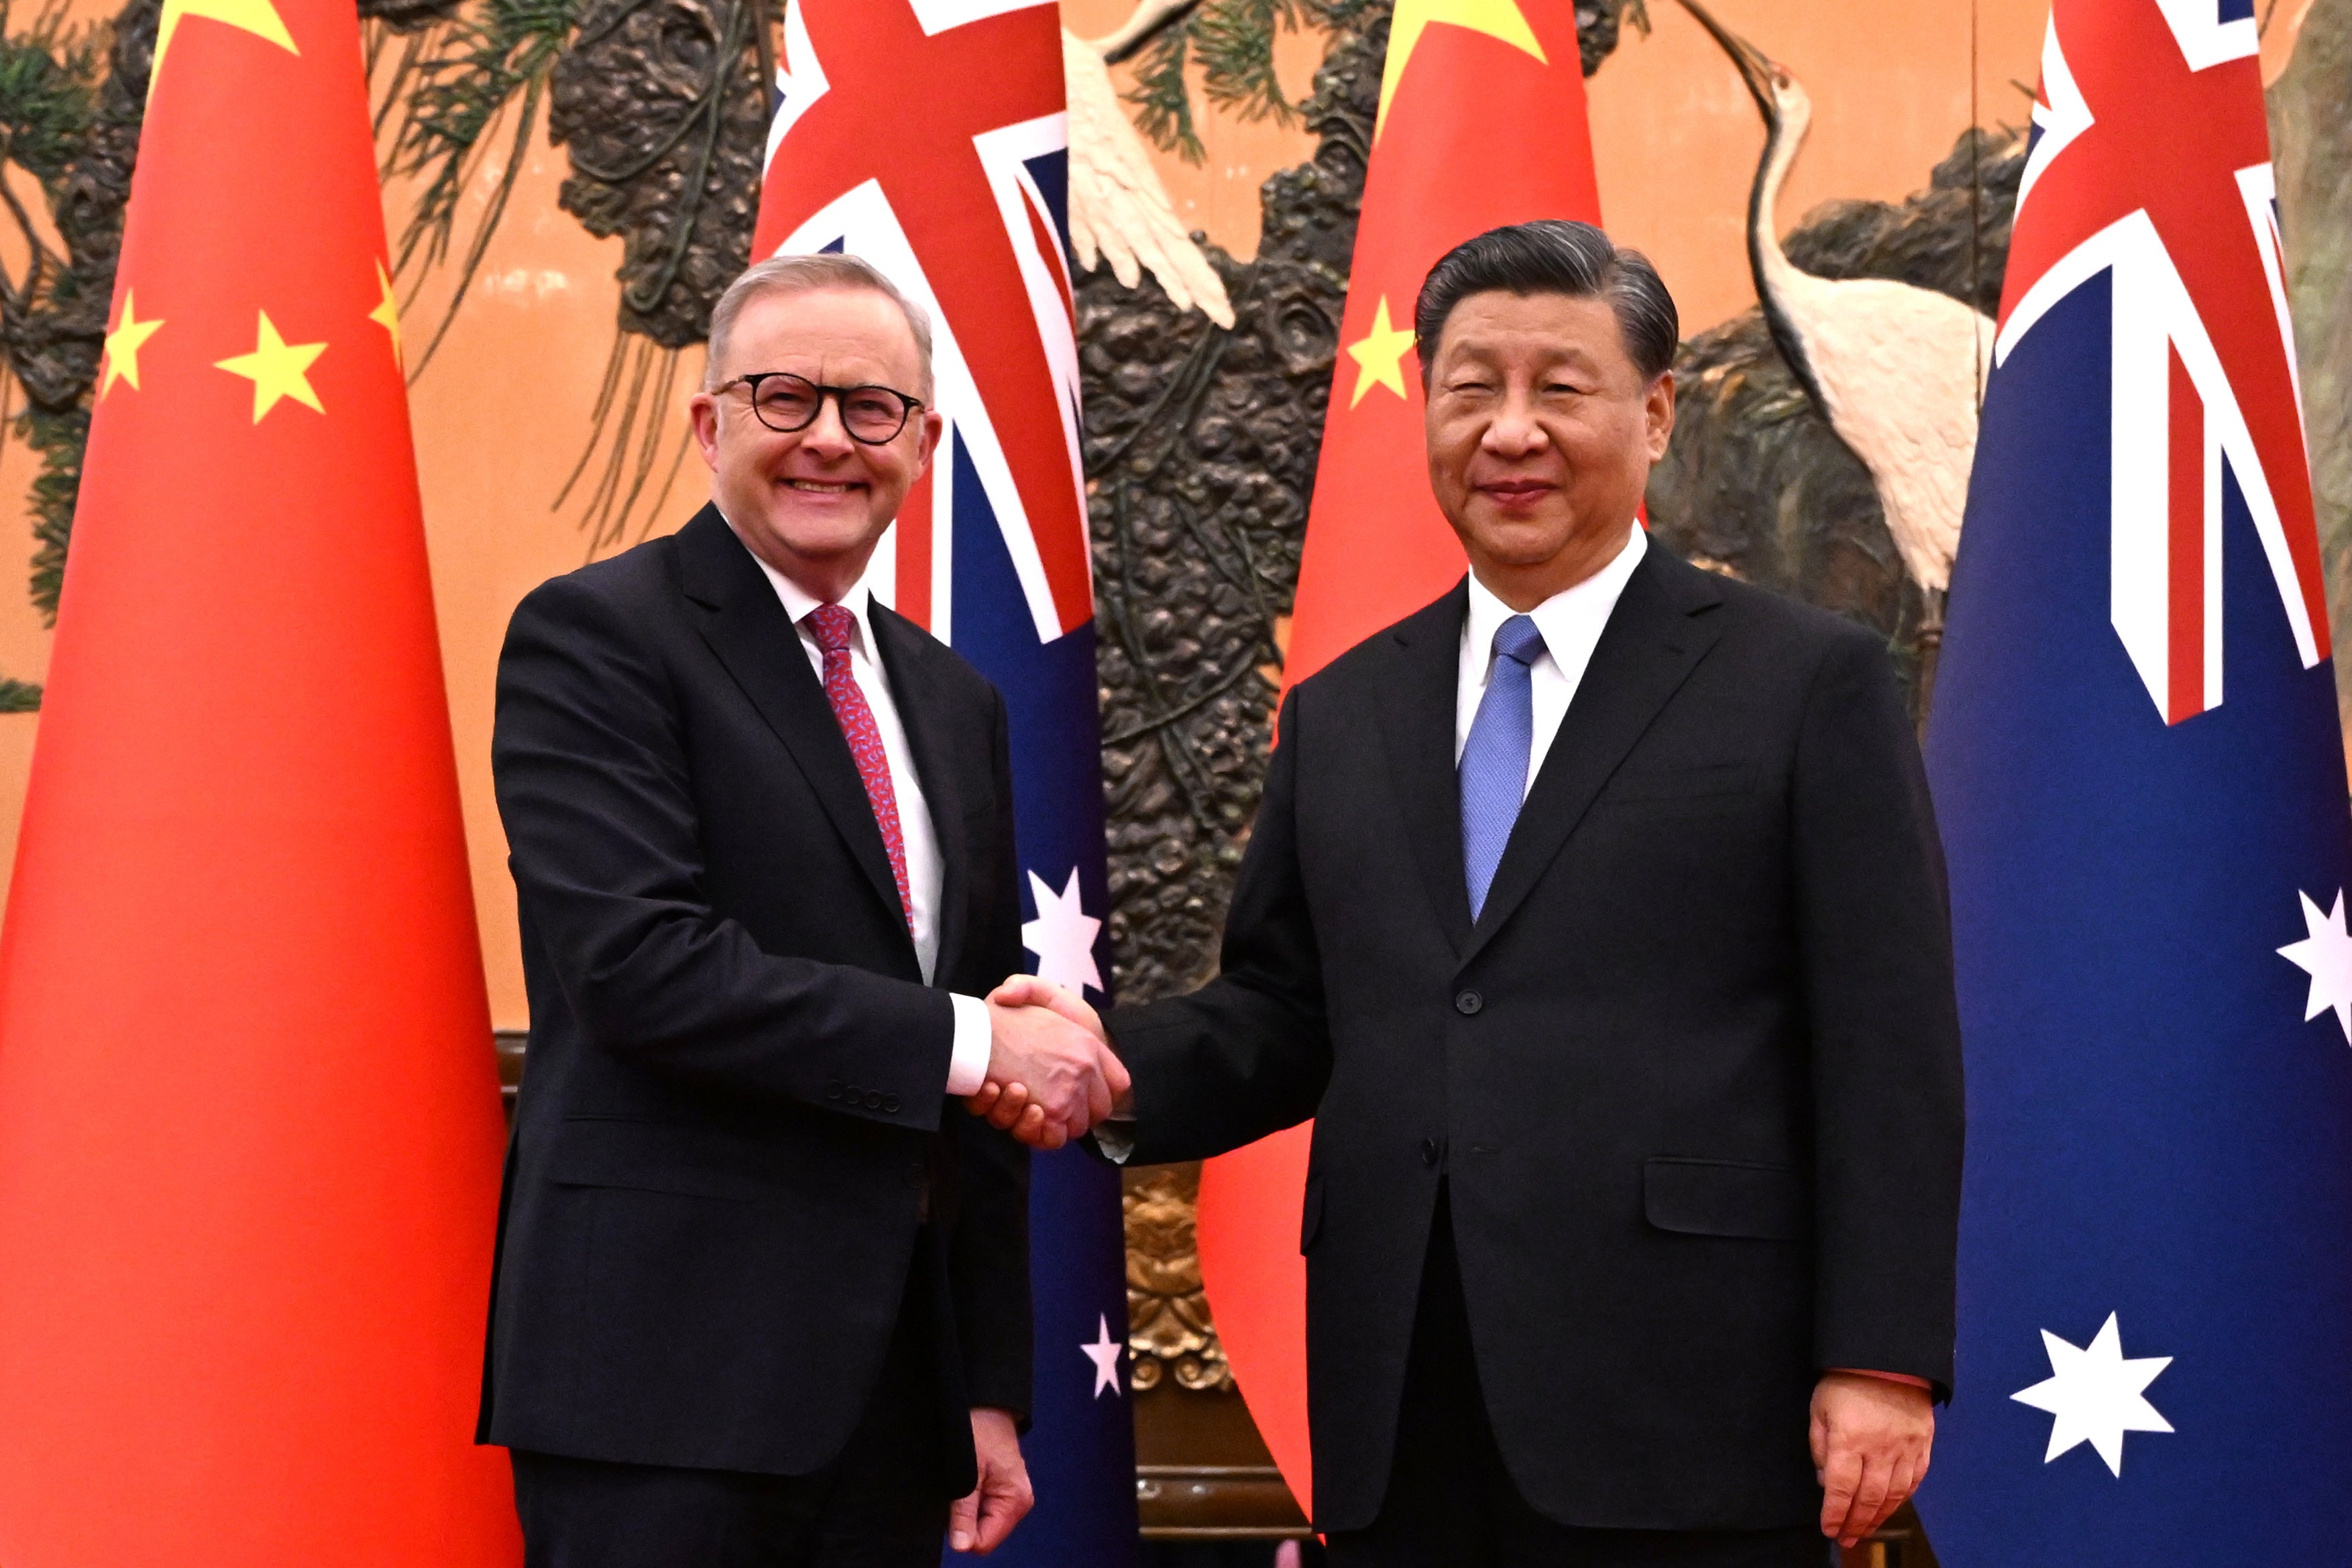 Australian Prime Minister Anthony Albanese meets with Chinese President Xi Jinping at the Great Hall of the People in Beijing, China